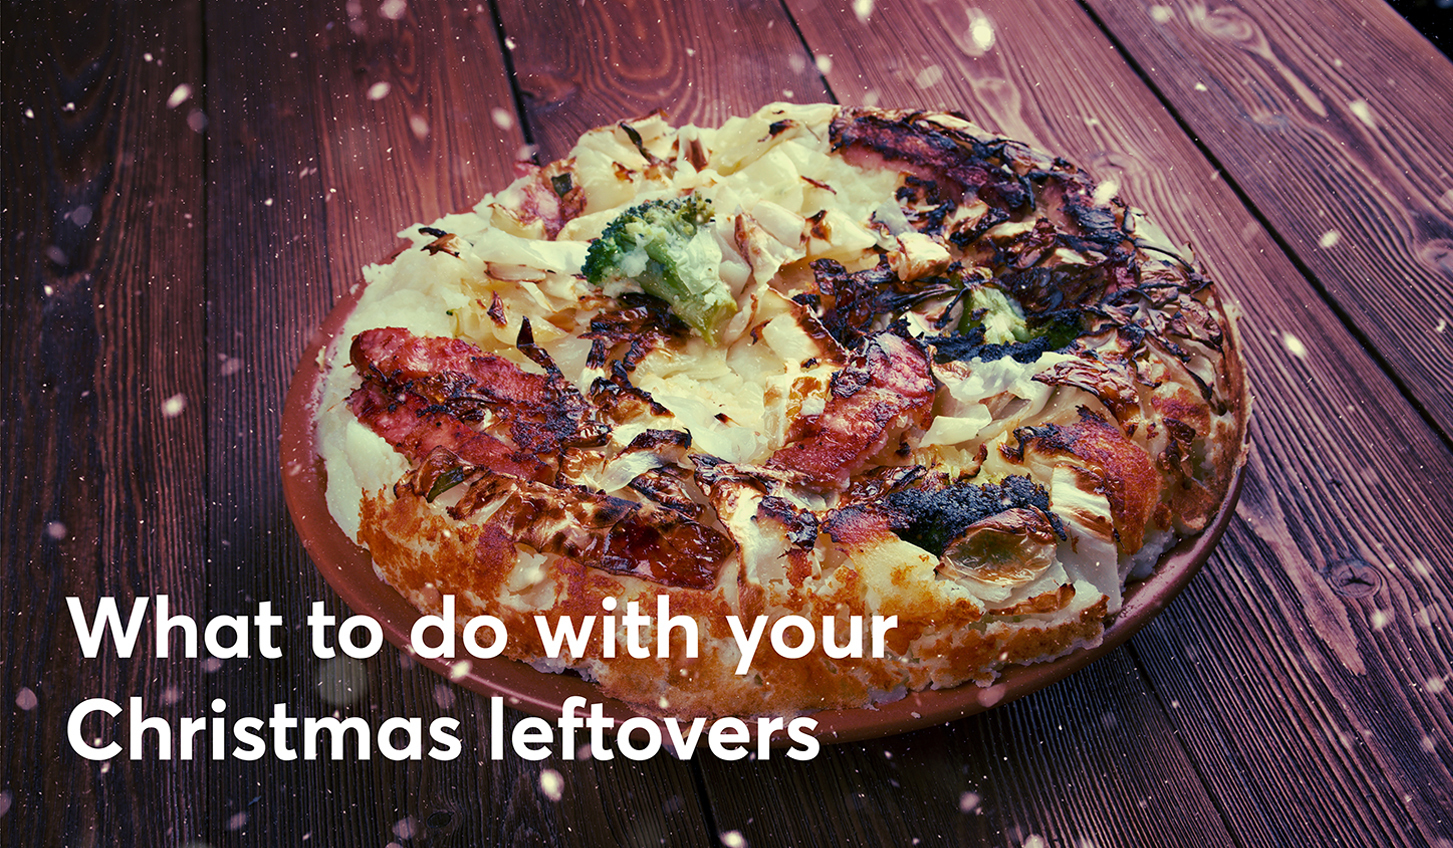 What to do with your Christmas leftovers?